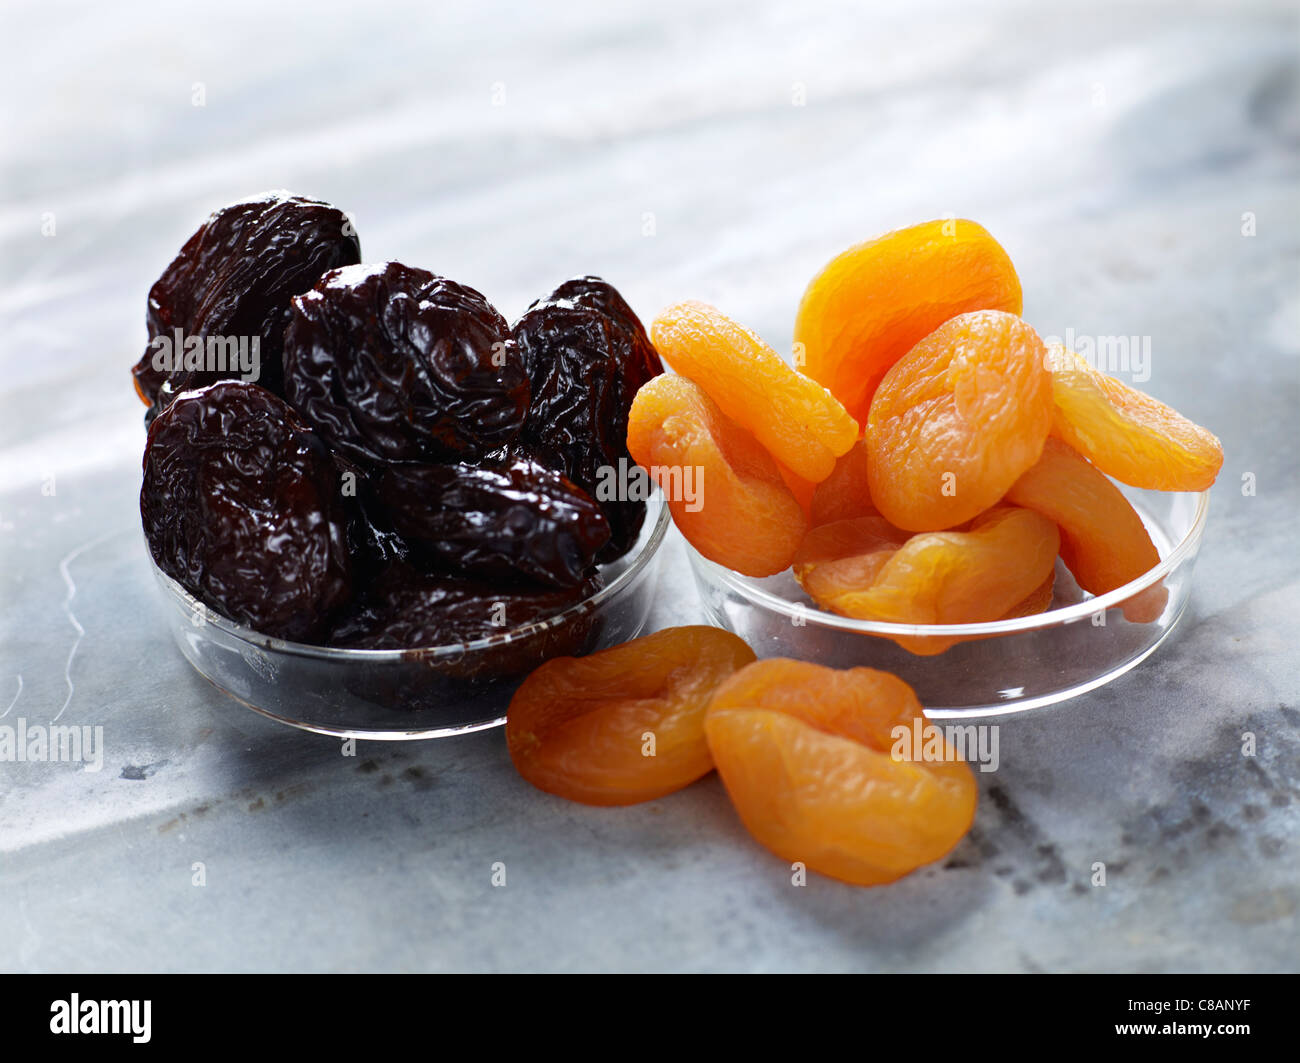 Dried apricots and prunes Stock Photo